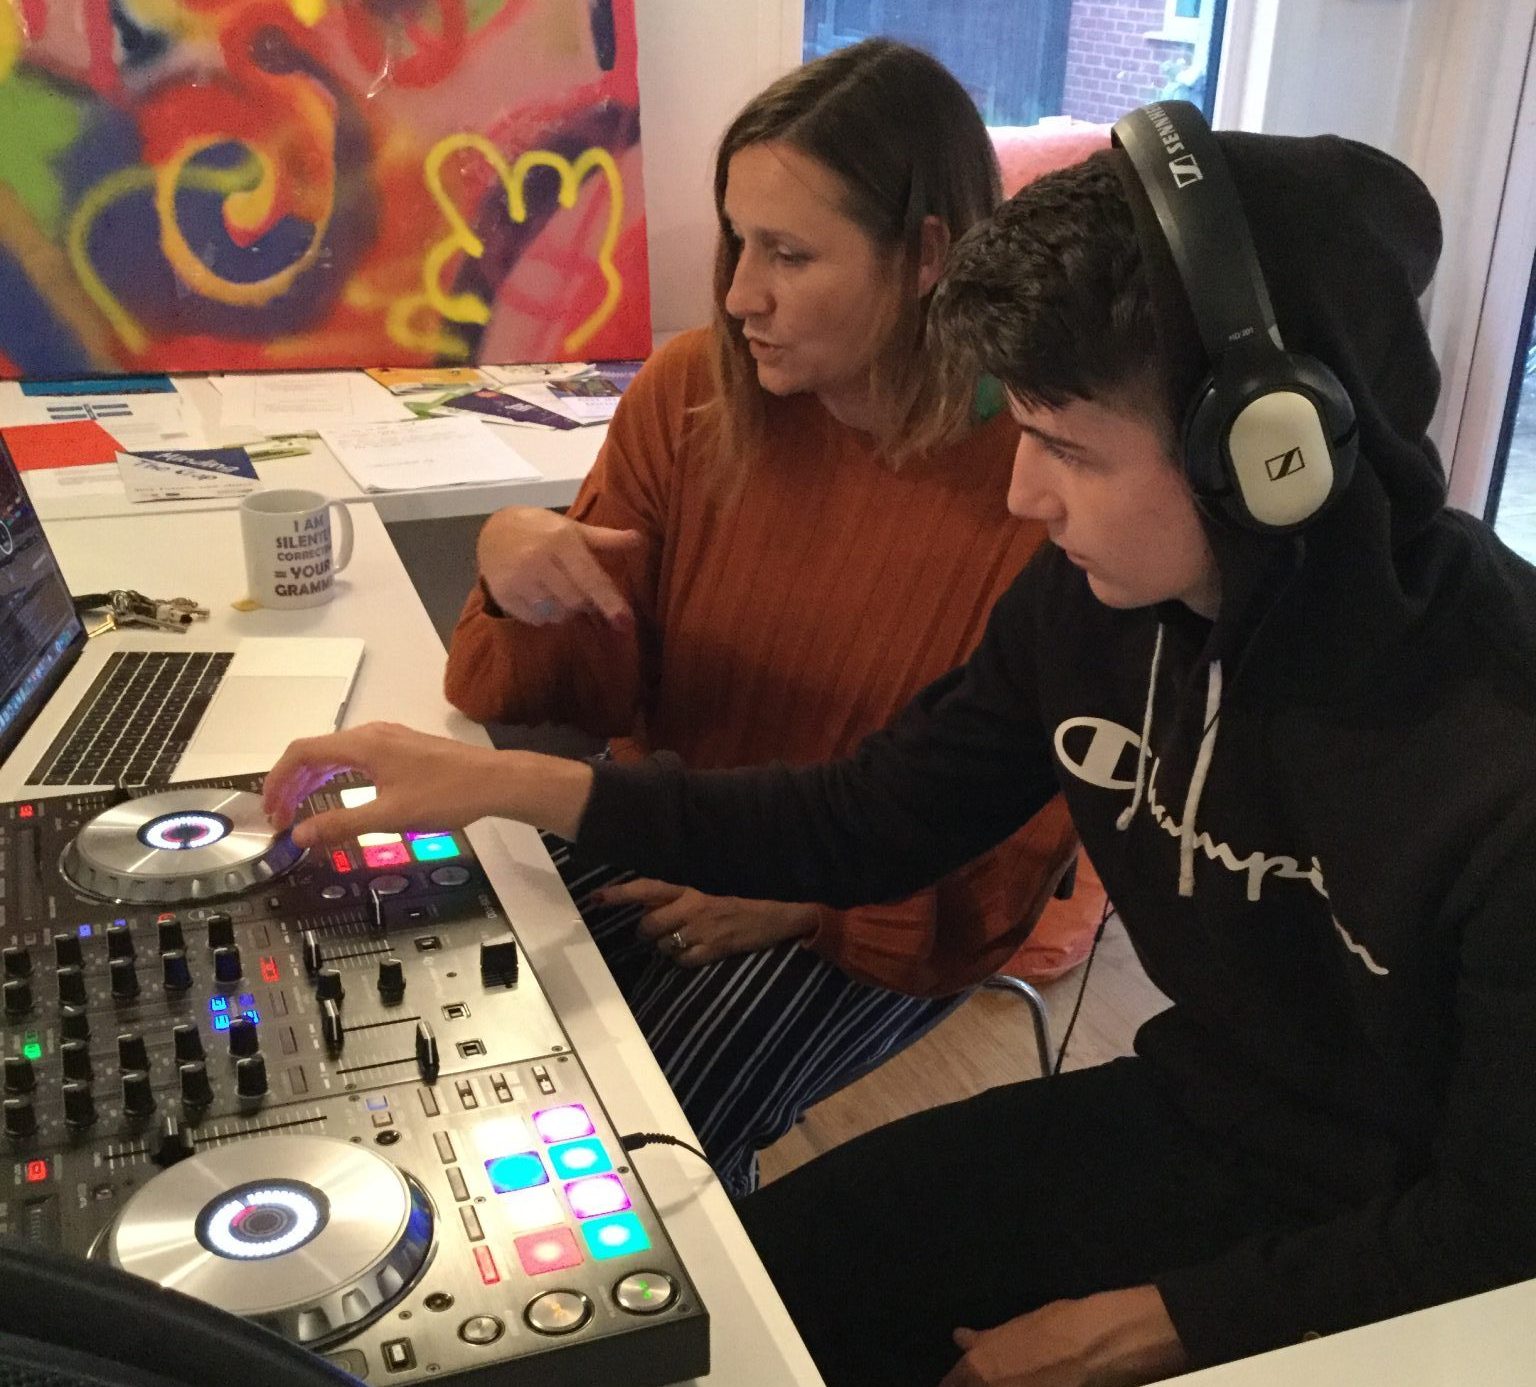 DJ tutor, Sophie, talking a young resident through mixing some tunes